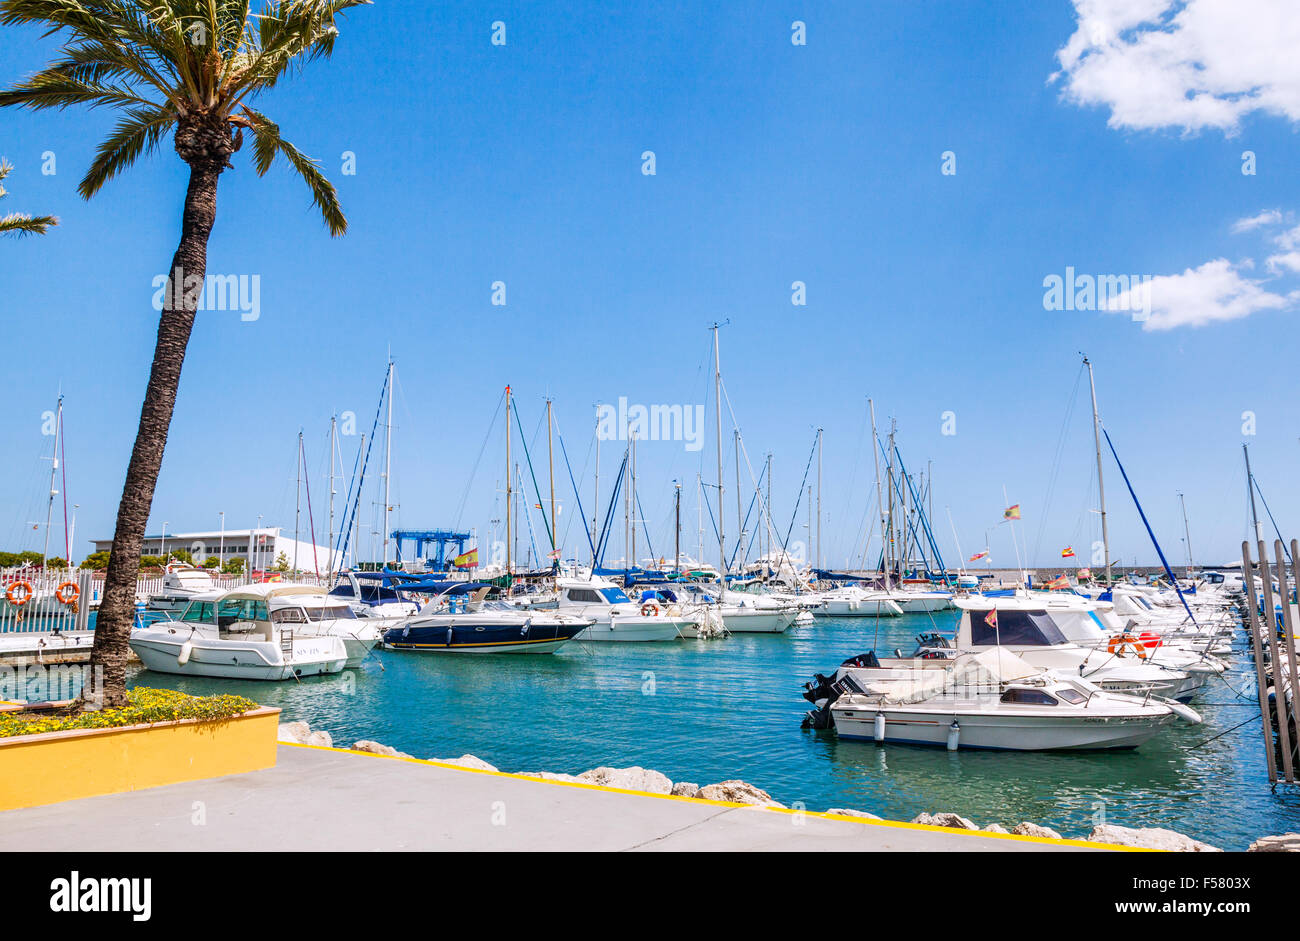 Spain, Andalusia, Málaga Province, Costa del Sol Oriental, view of the yacht harbour of the coastal town Caleta de Vélez Stock Photo